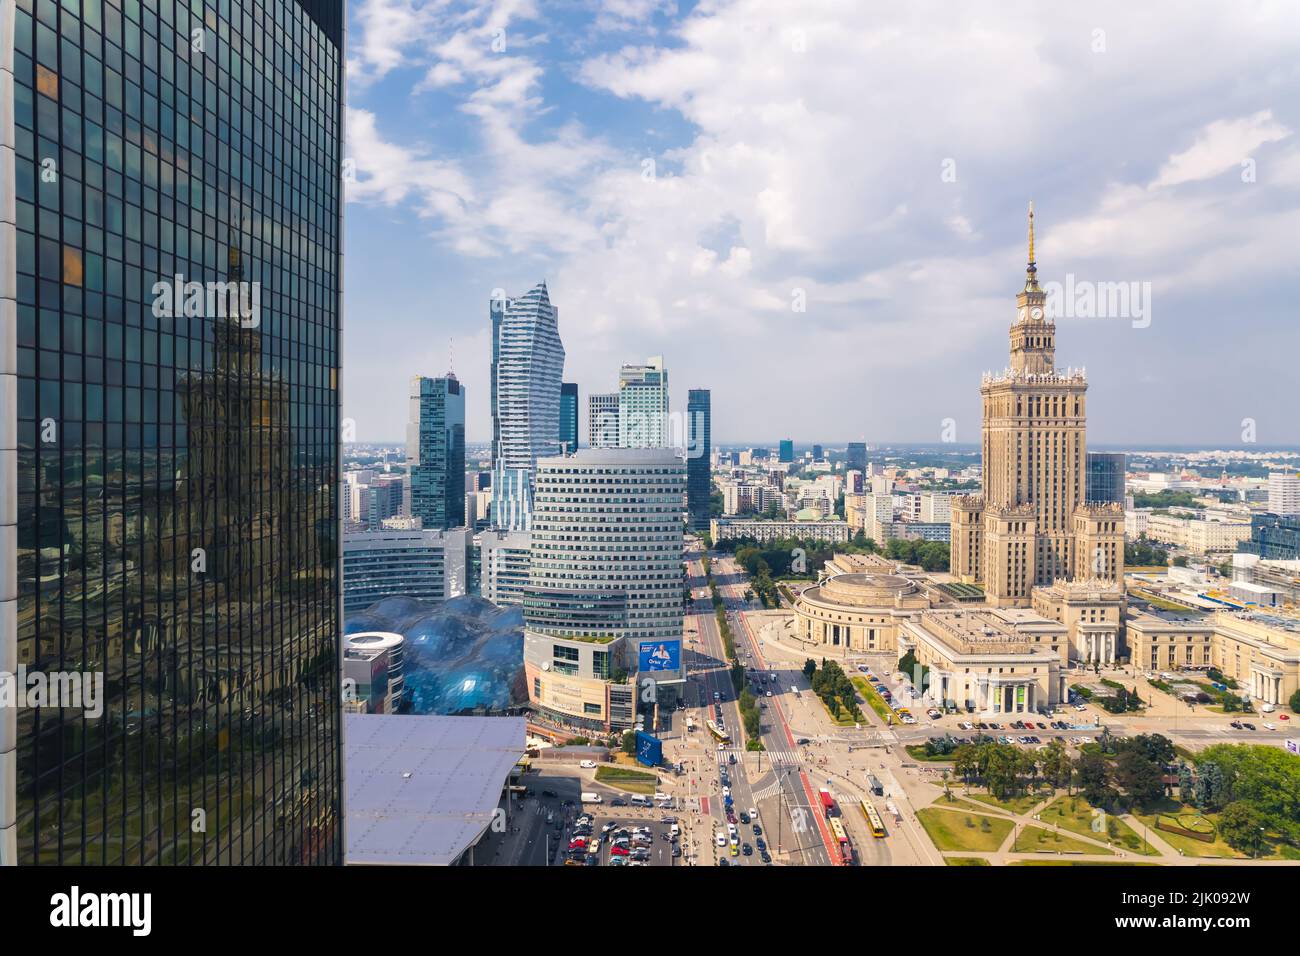 7.22.2022 Warsaw, Poland. The reflection of Palace of Culture and Science on the glass side of Centrum LIM skyscraper. Neomodern buildings vs. social realism. High quality photo Stock Photo